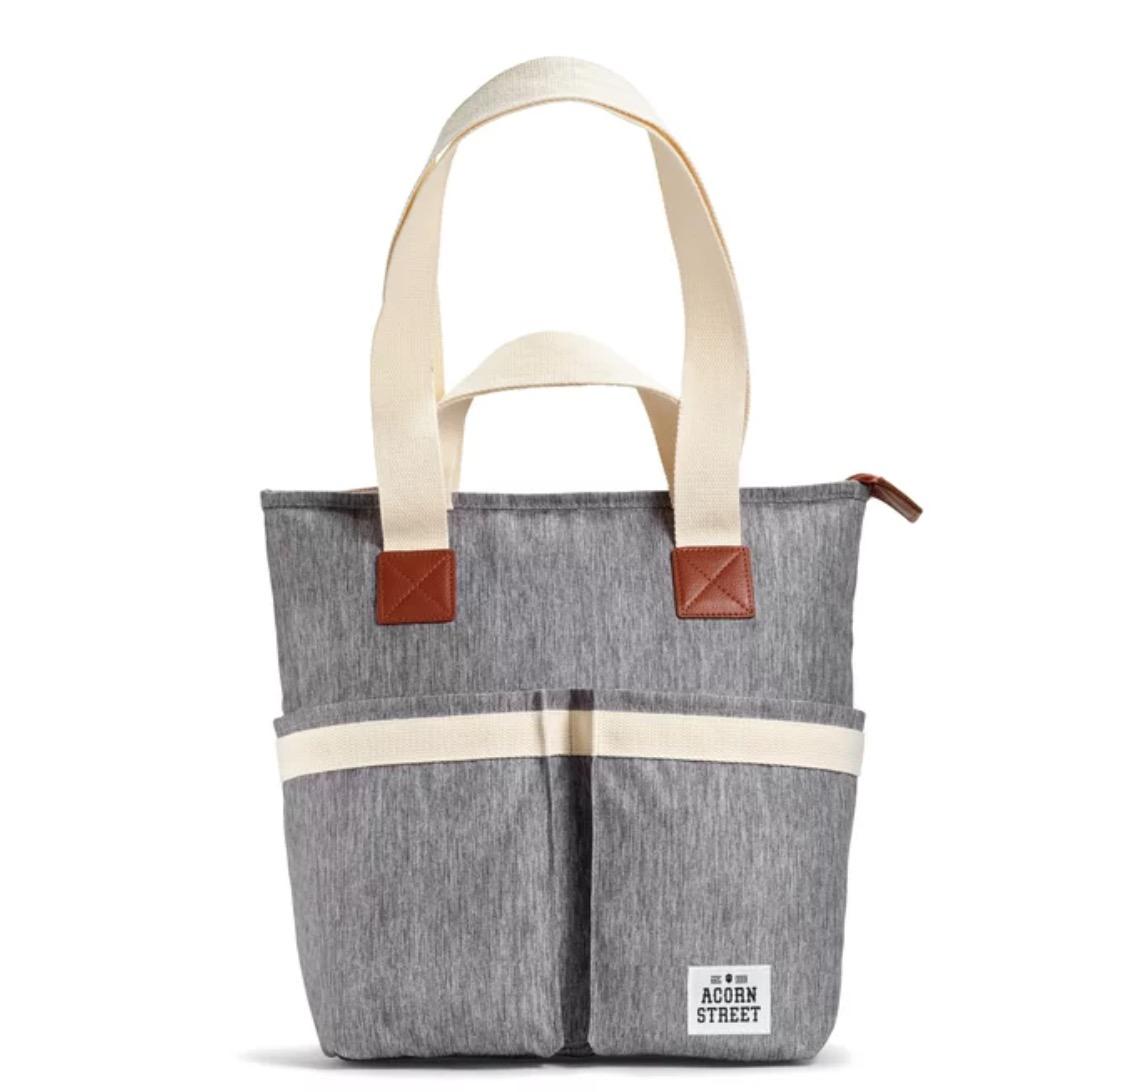 Acorn Street Insulated Cooler Tote Bags and Ice Packs or $7.99